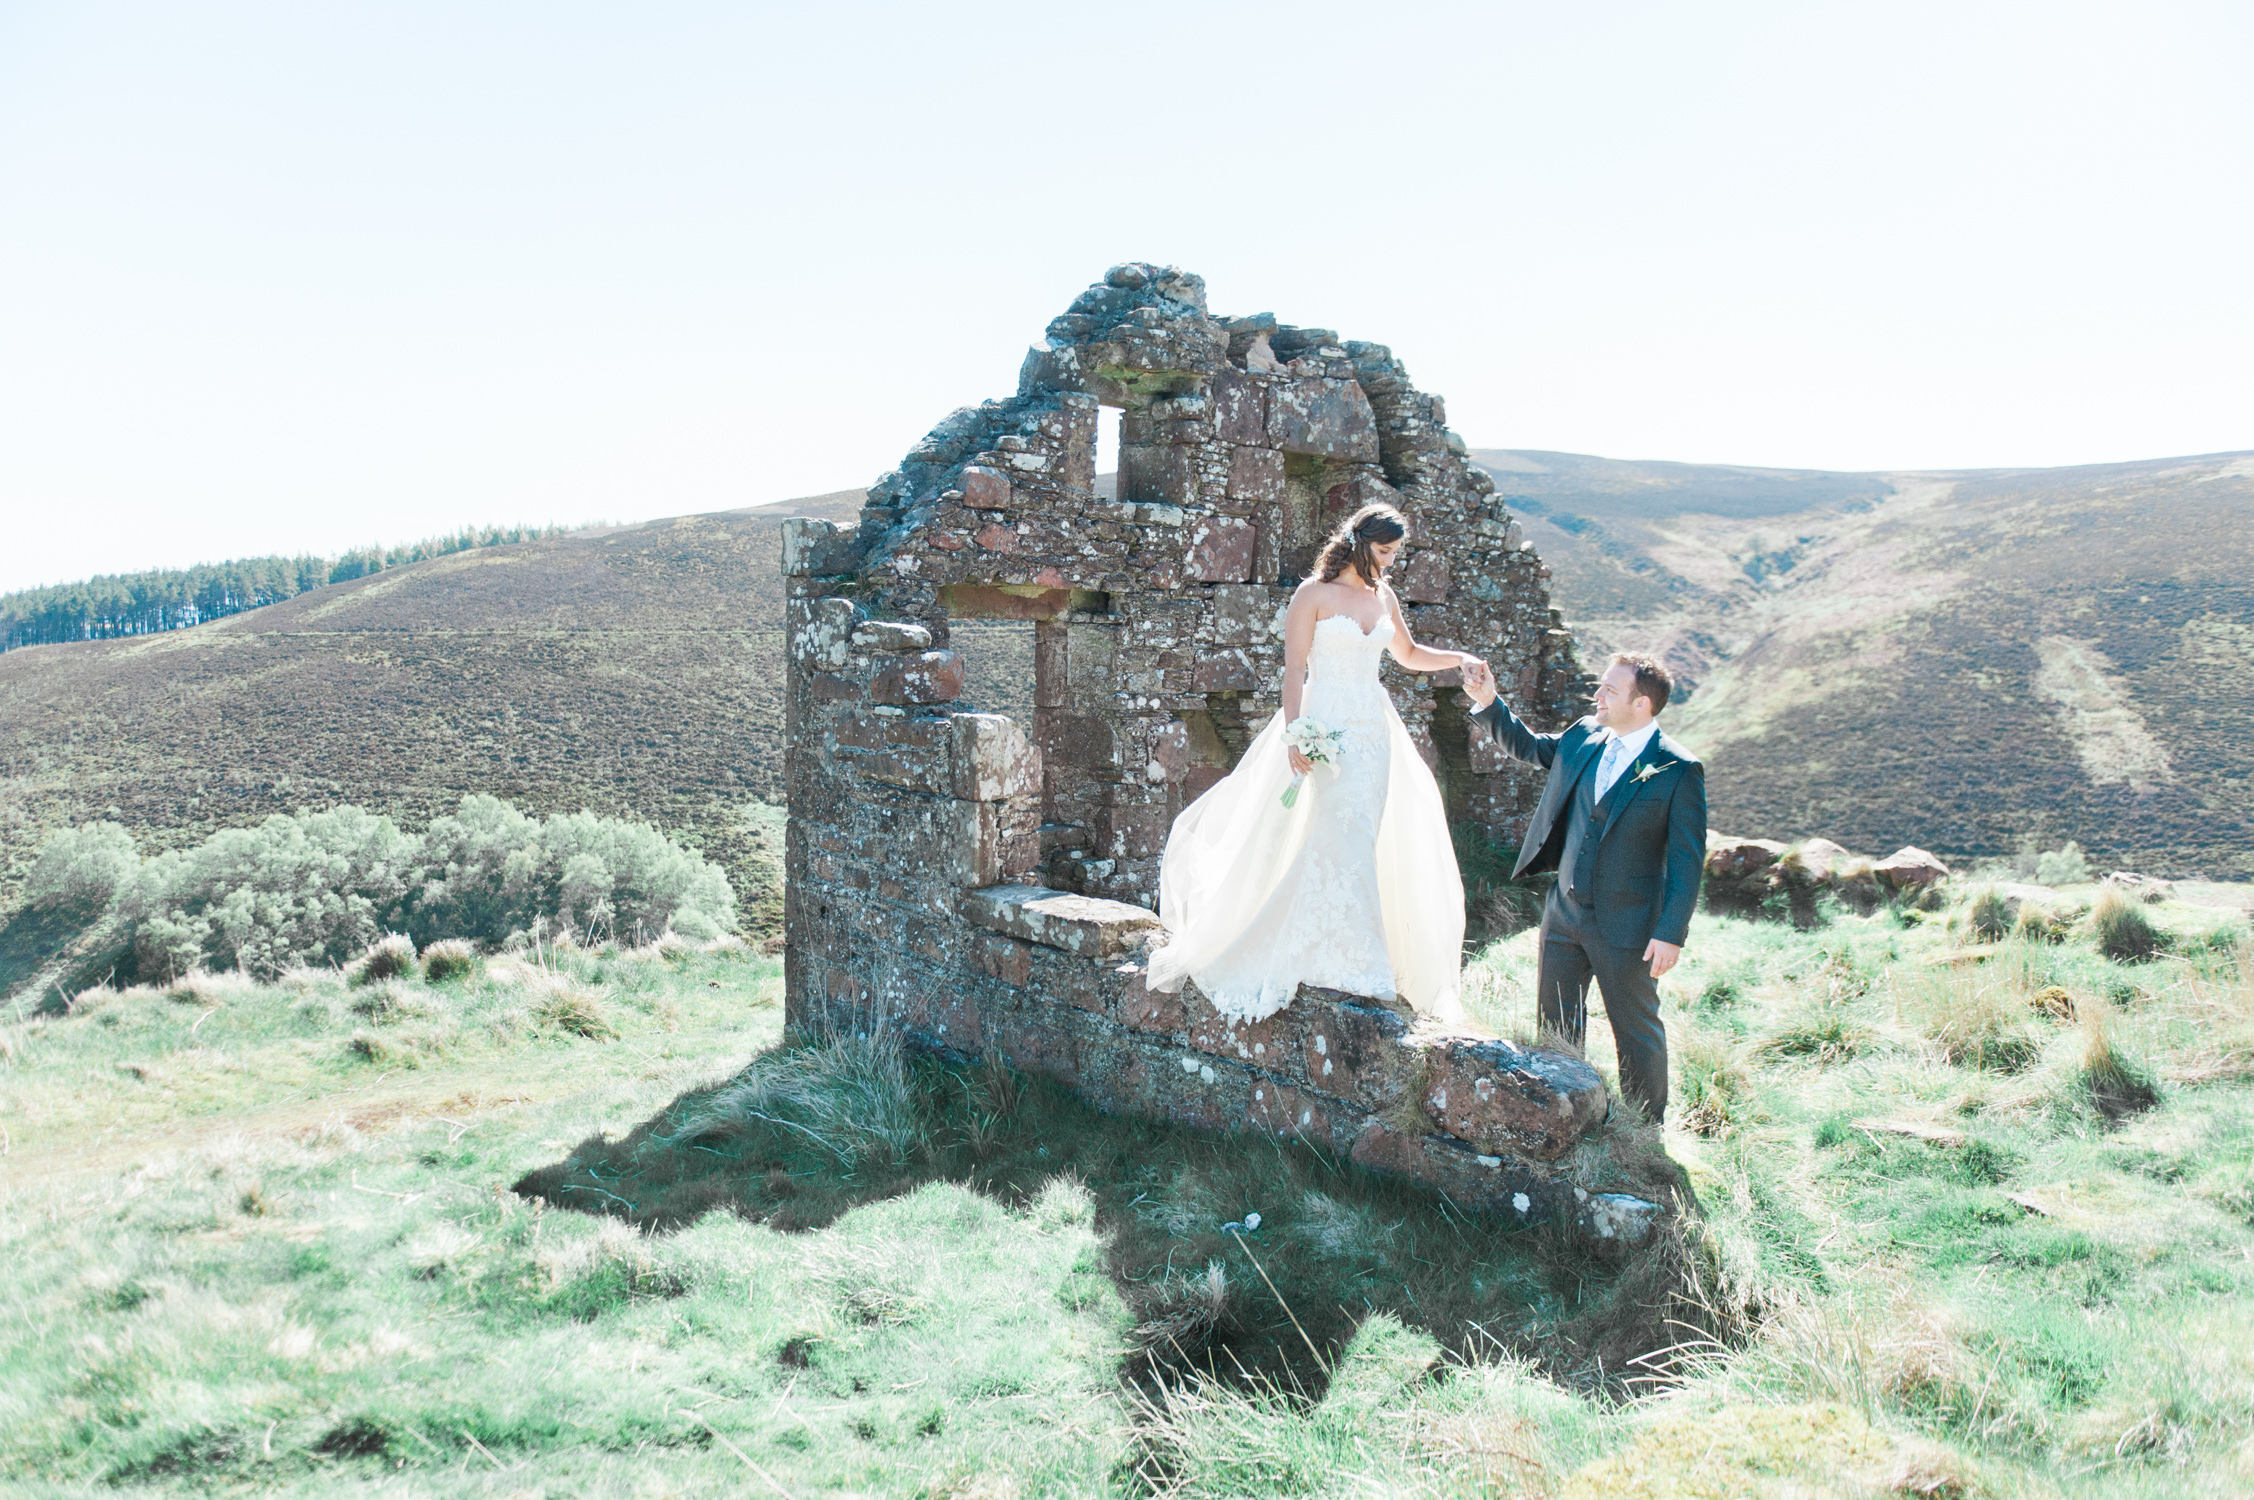 A bride and groom during their wedding photo shoot at a ruin in Scotland